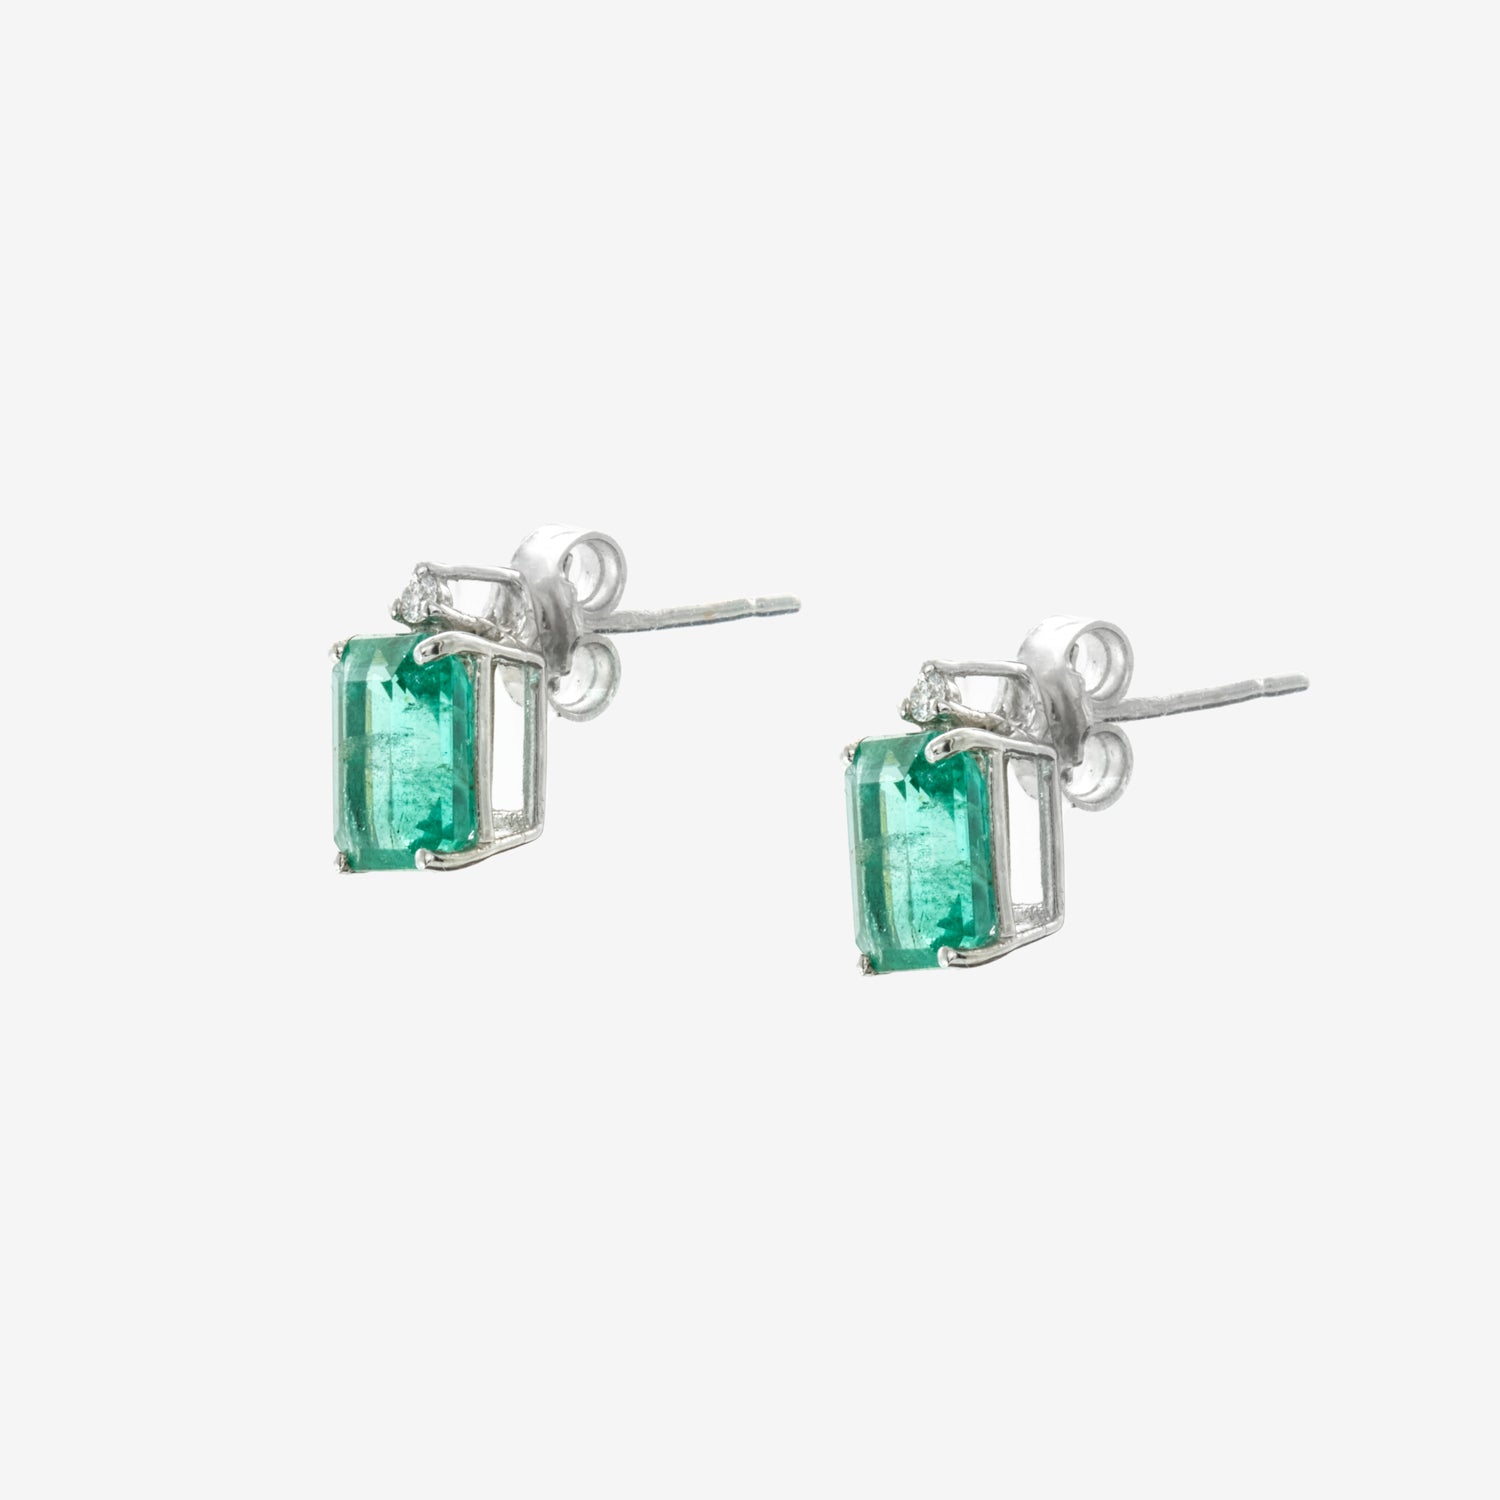 EARRINGS WITH EMERALDS AND DIAMONDS